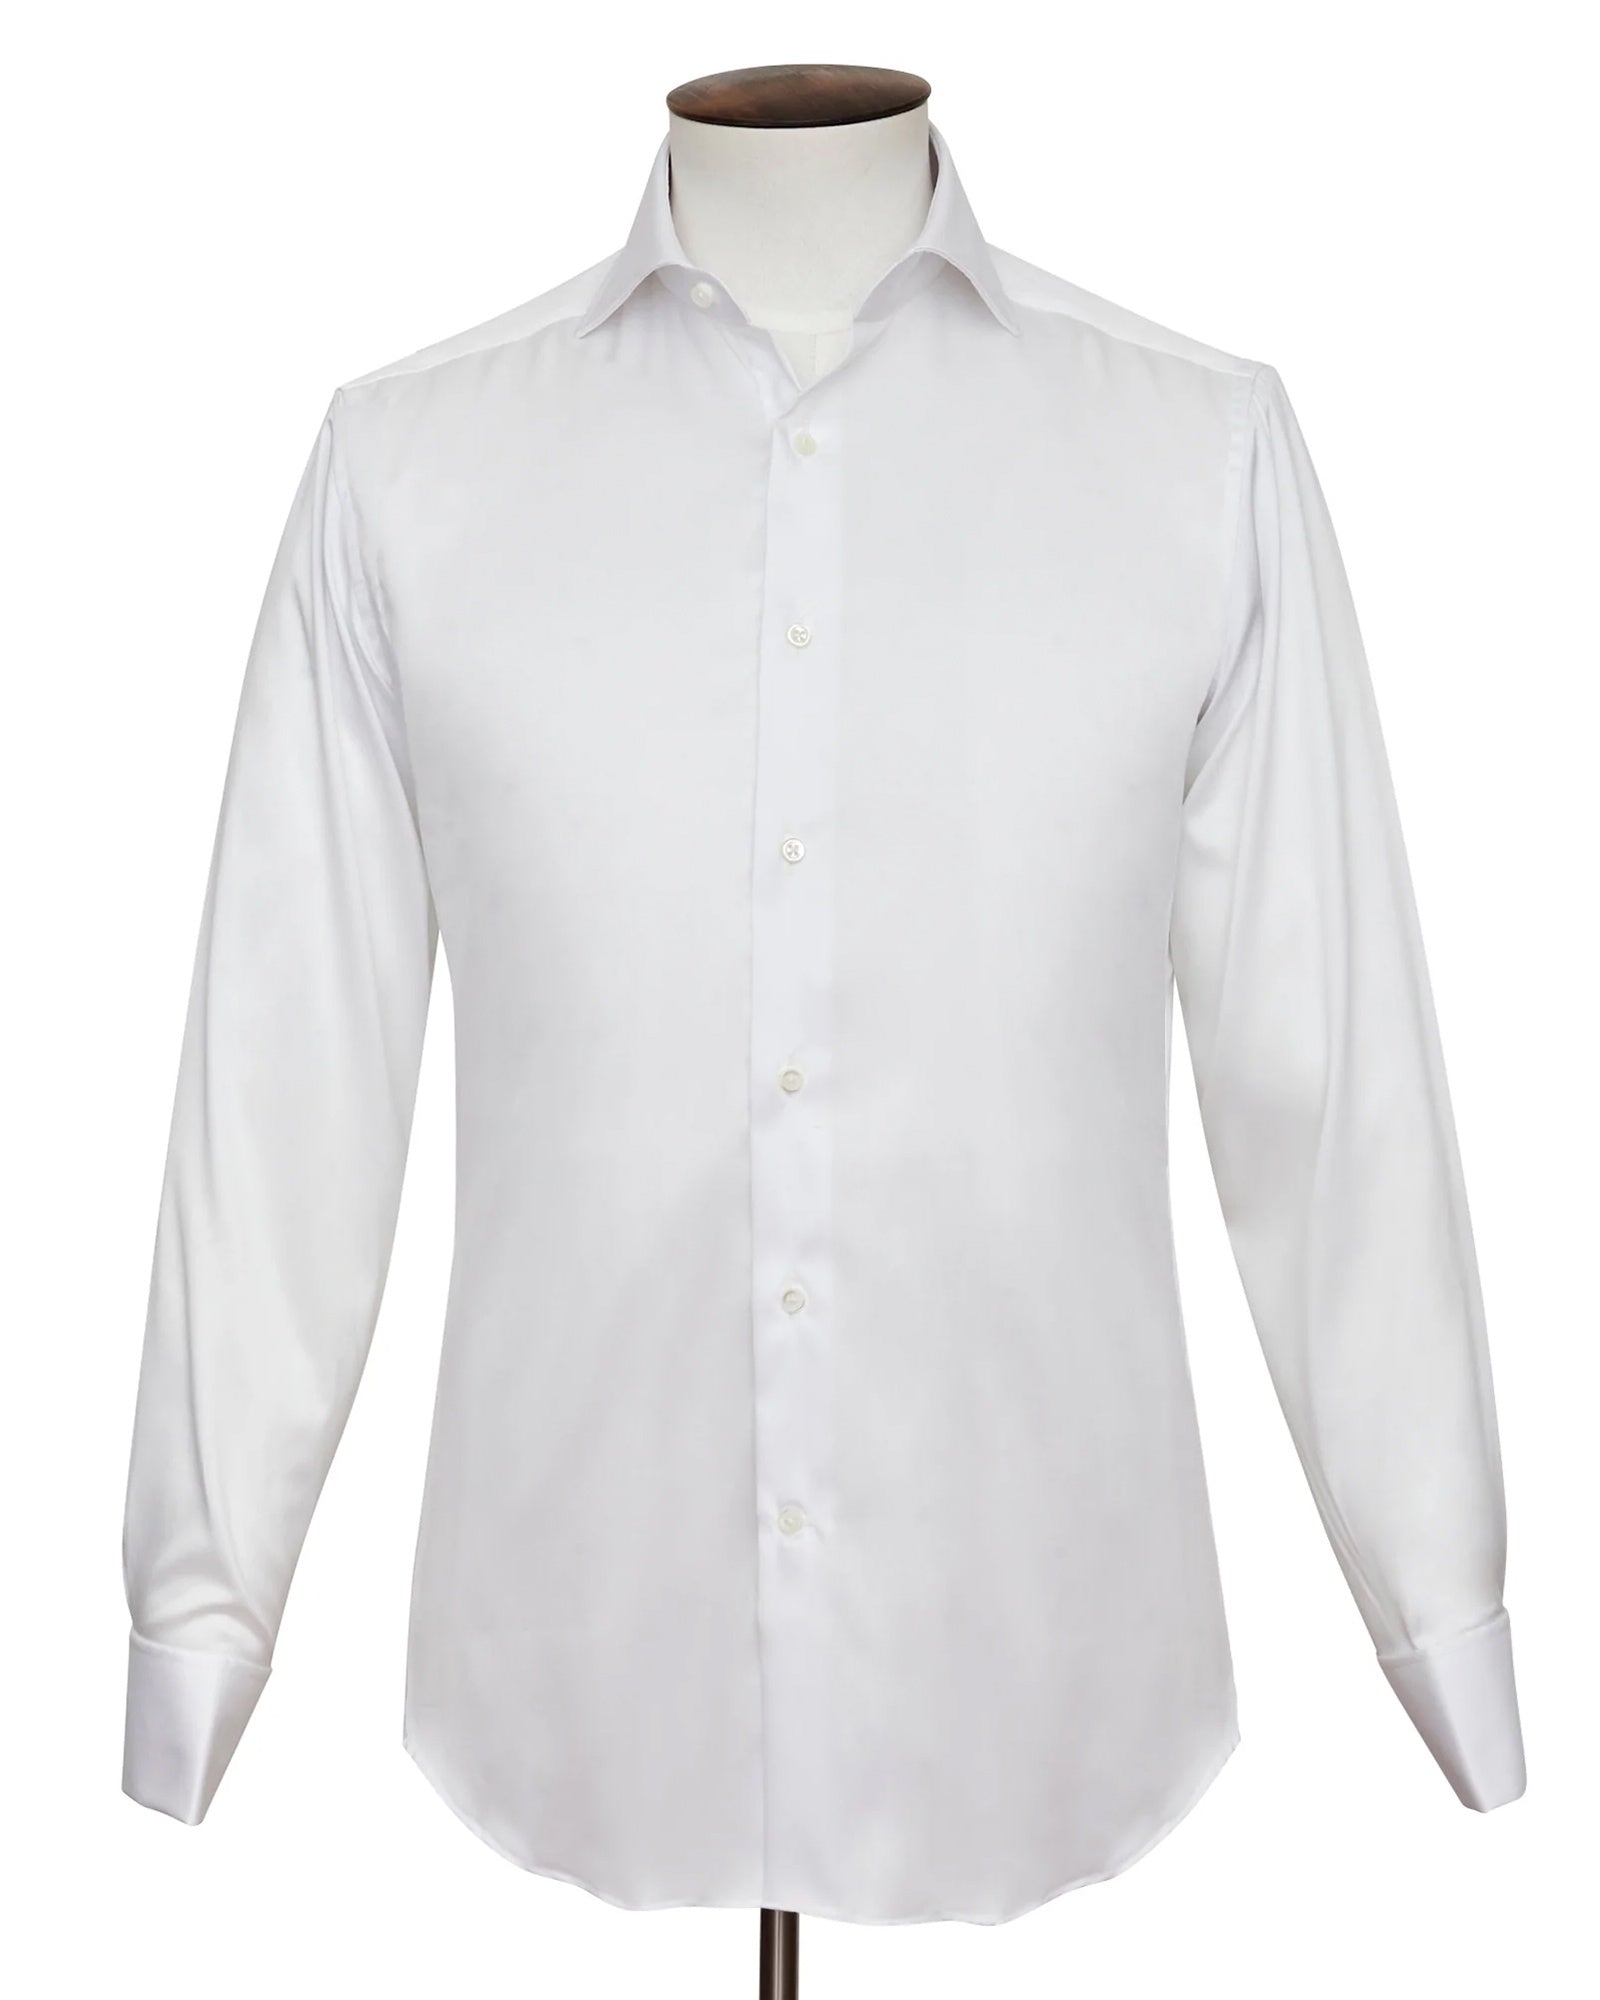 White Double Cuff Shirt - Second